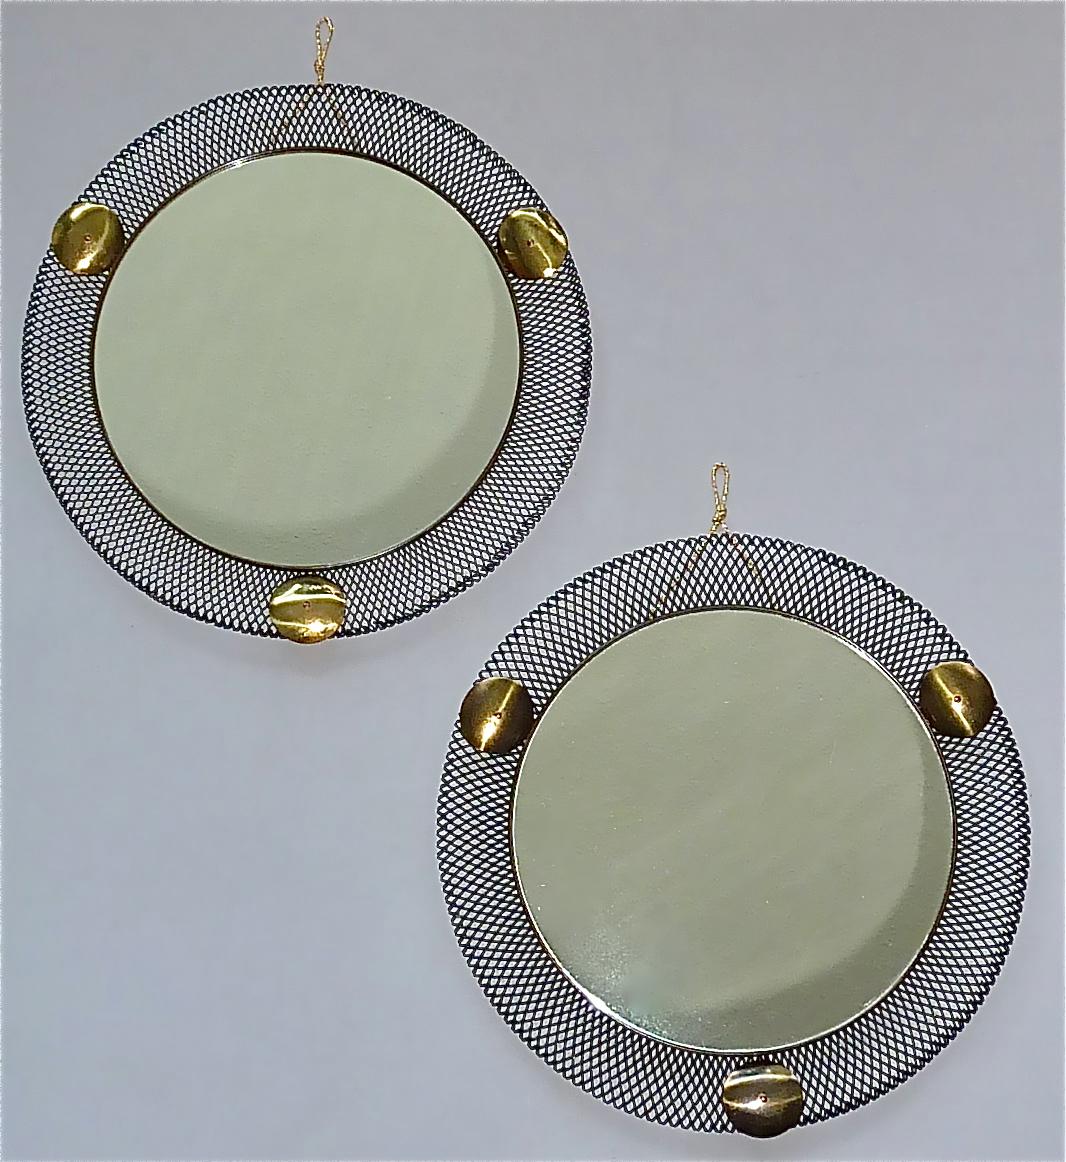 Rare pair of round midcentury wall mirrors which are made in the style of Jacques Biny, Mathieu Mategot or Pierre Guariche, France or Italy circa 1955. They are made of black lacquered or enameled stretched metal, lovely patinated brass details,